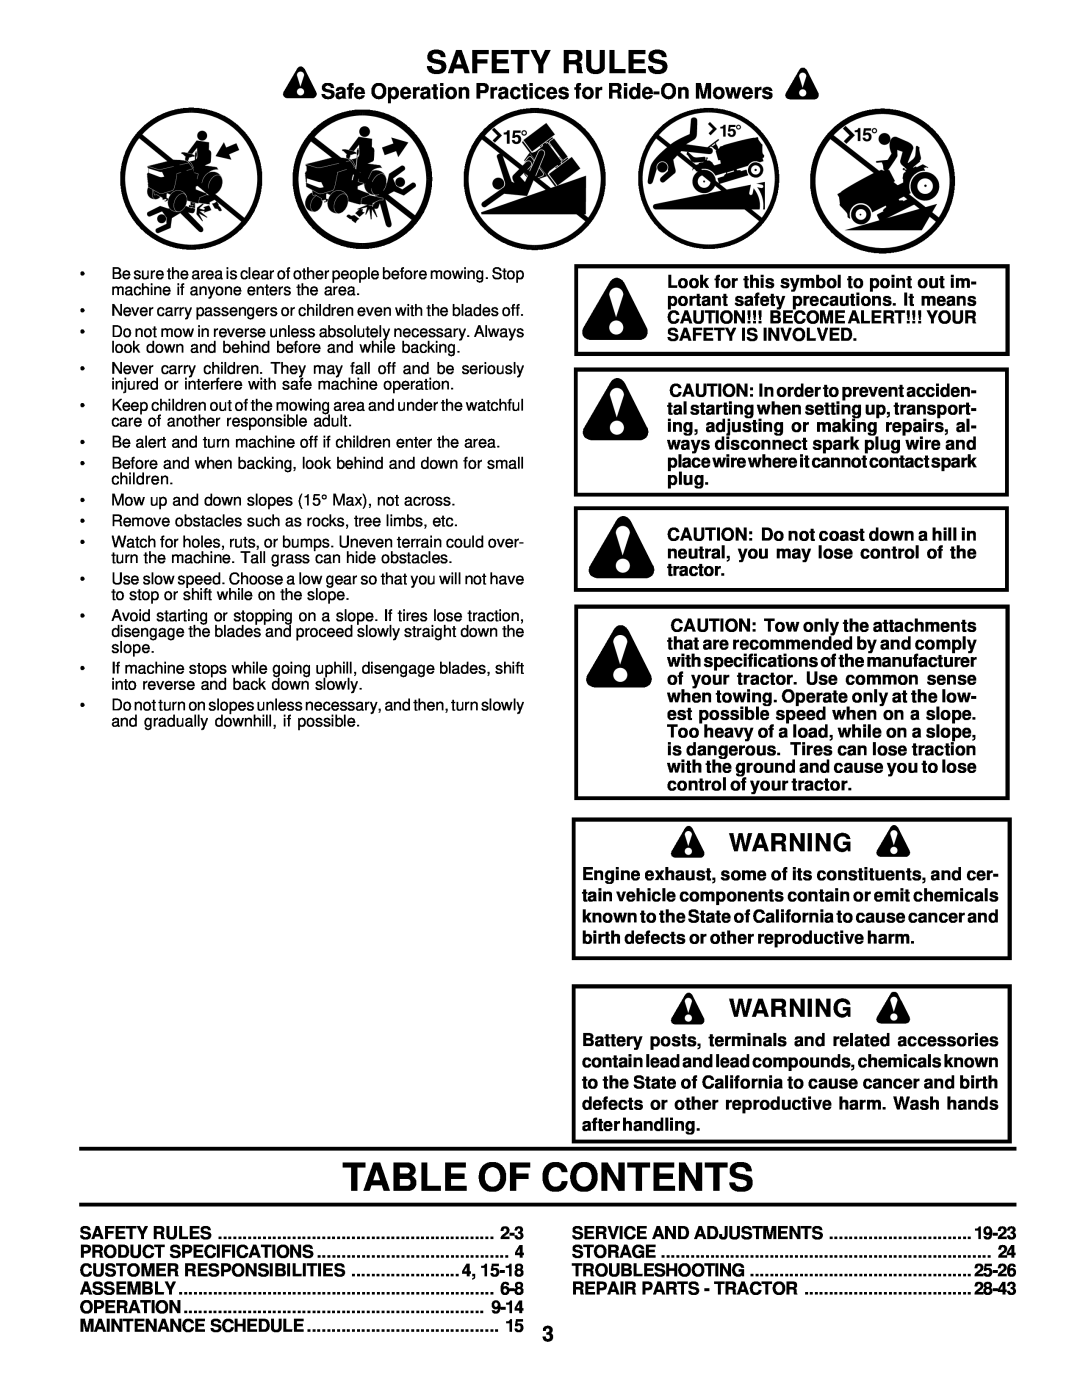 Poulan 176085 owner manual Table Of Contents, Safety Rules, Safe Operation Practices for Ride-On Mowers 